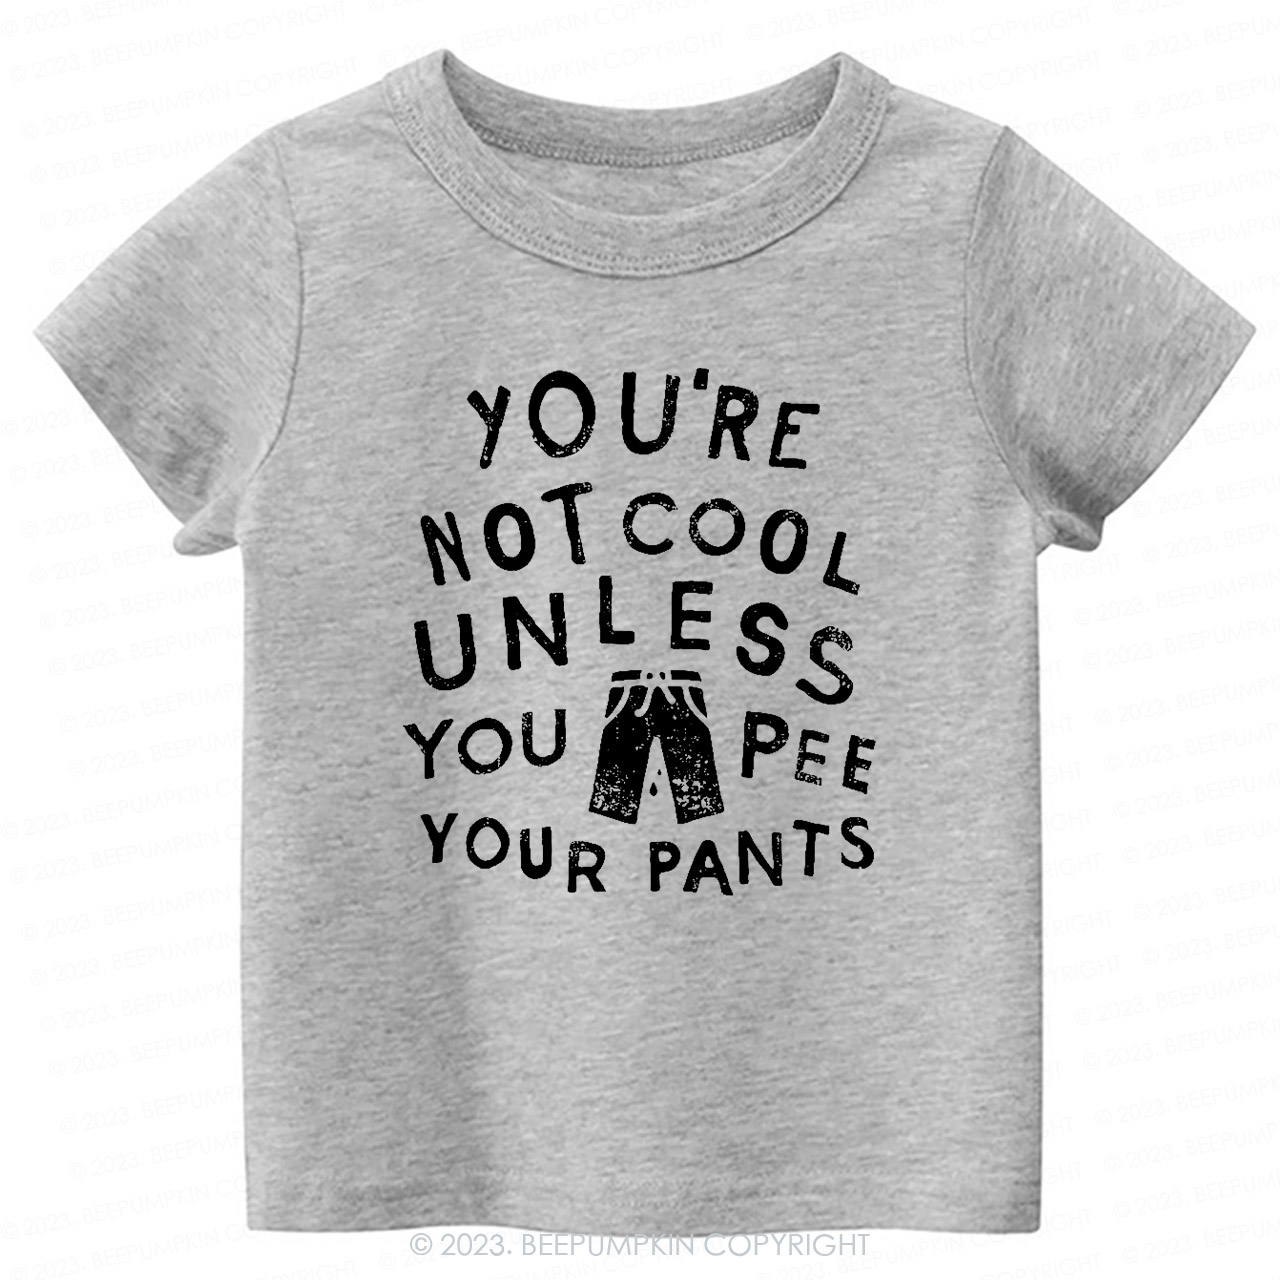 Pee Your Pants -Toddler Tees